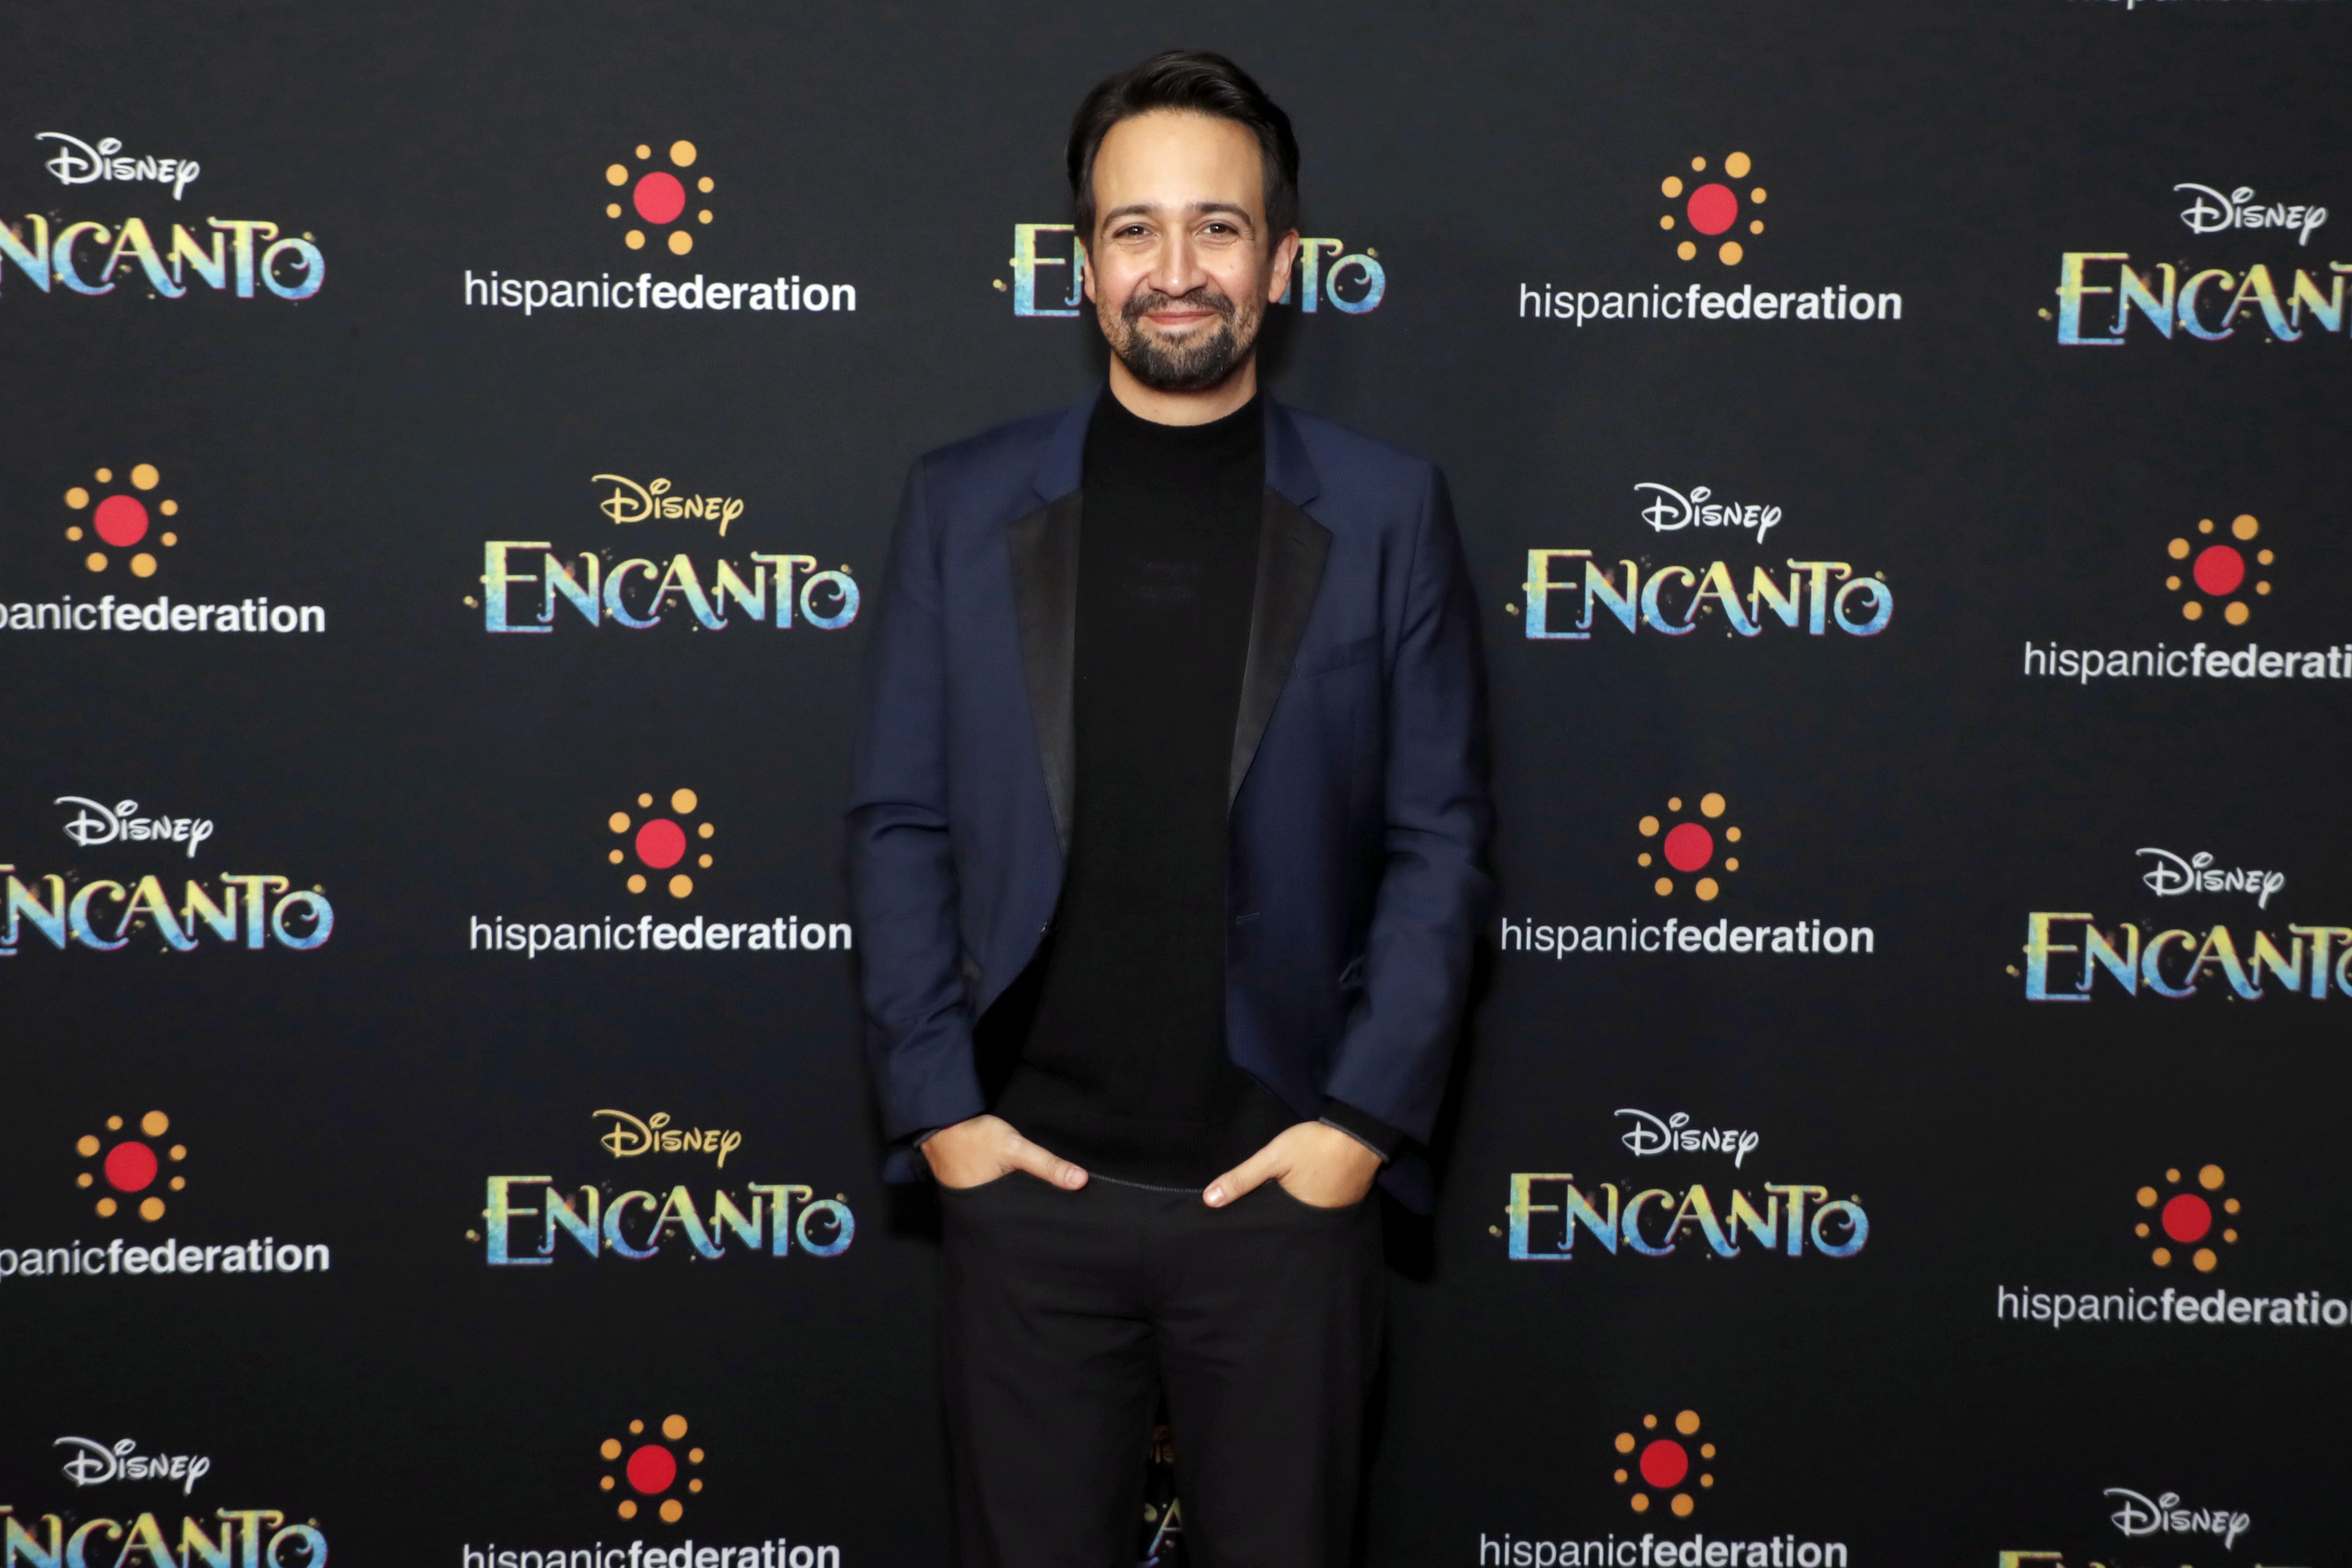 Lin-Manuel Miranda attends the New York premiere of Disney's 'Encanto,' hosted by The Hispanic Federation